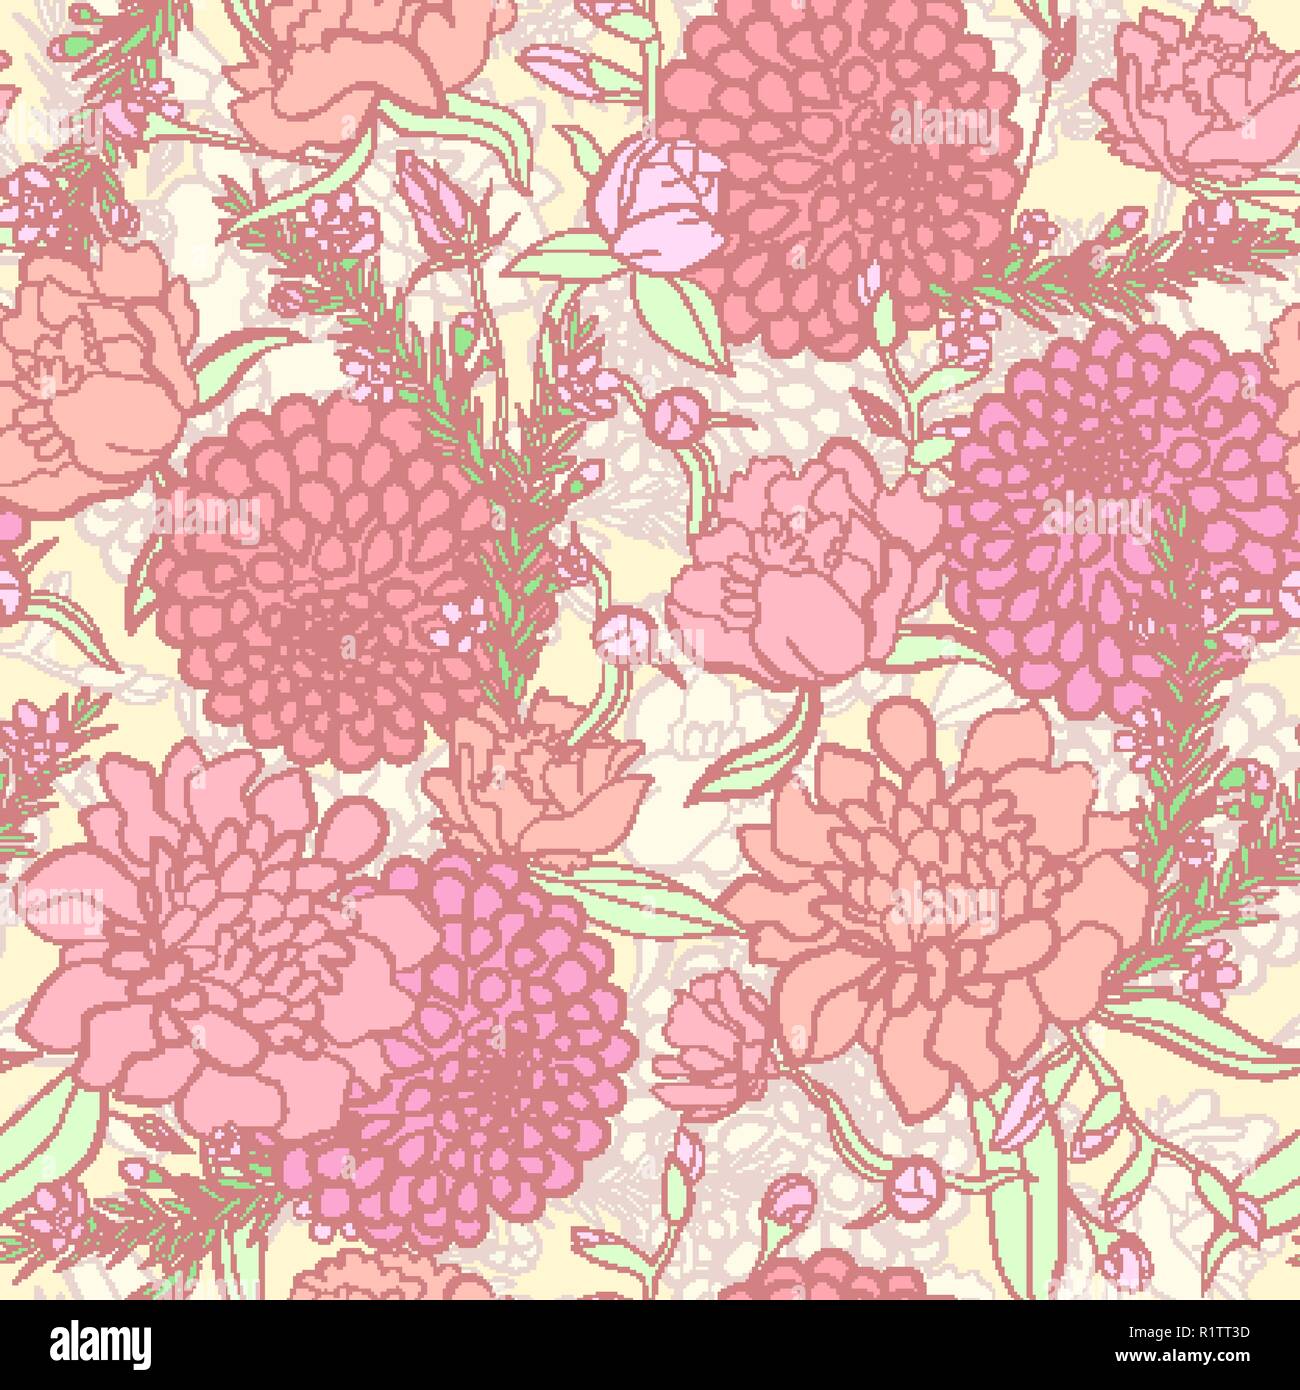 Floral background. Peonies. Flower pattern. Stock Vector